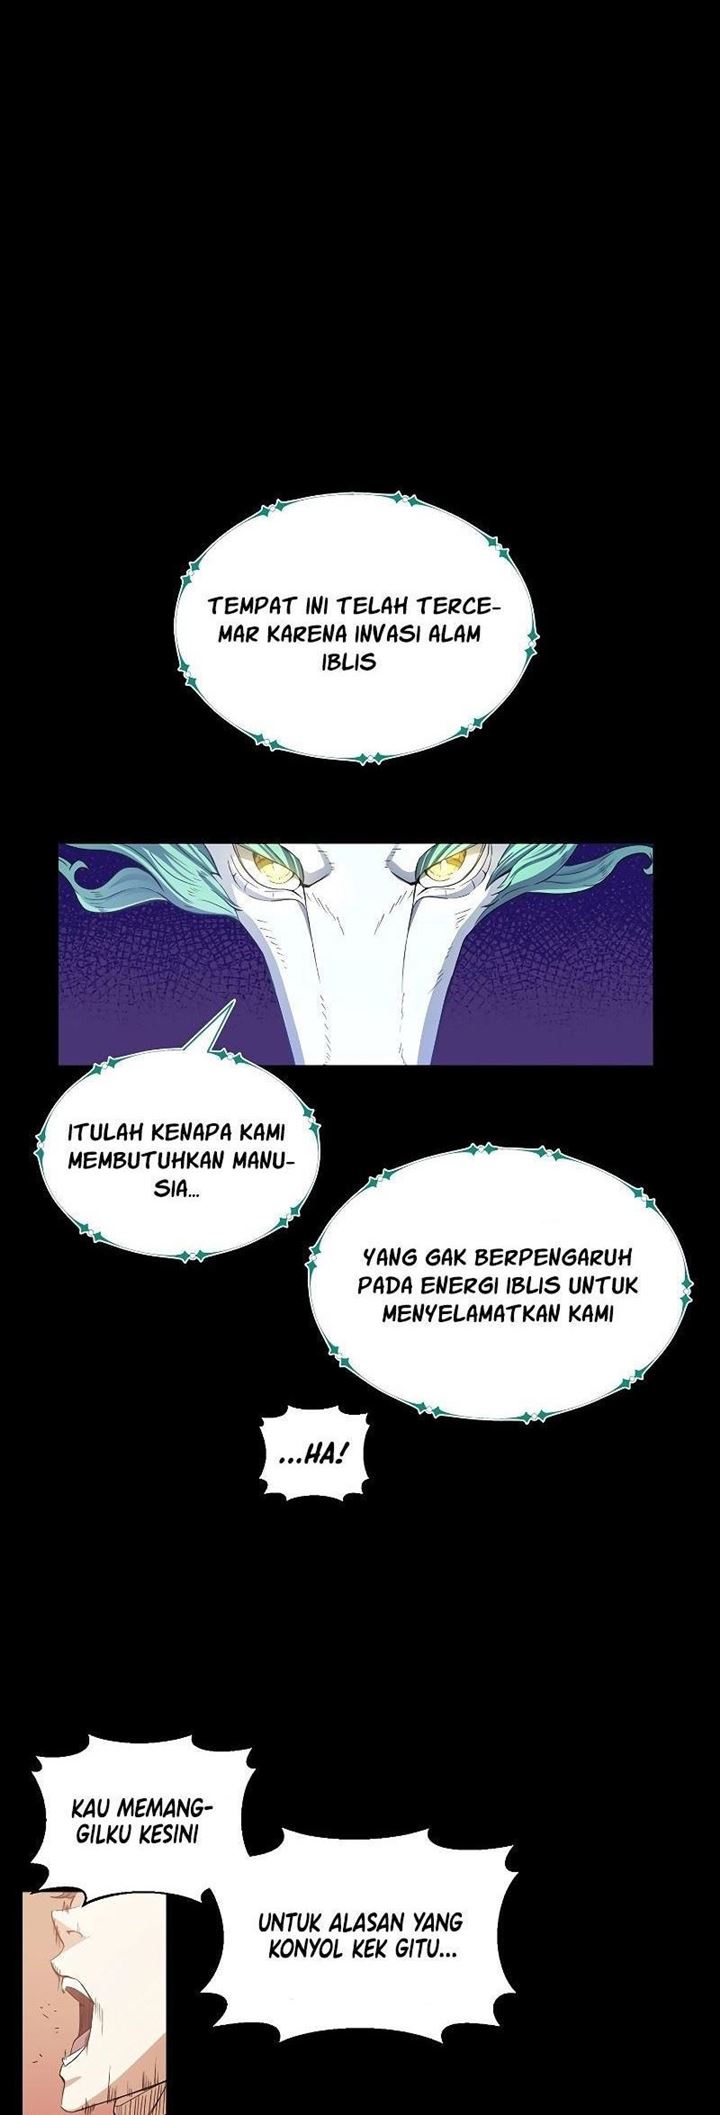 The Returning Warrior’s Alley Restaurant Chapter 01.5 Bahasa Indonesia